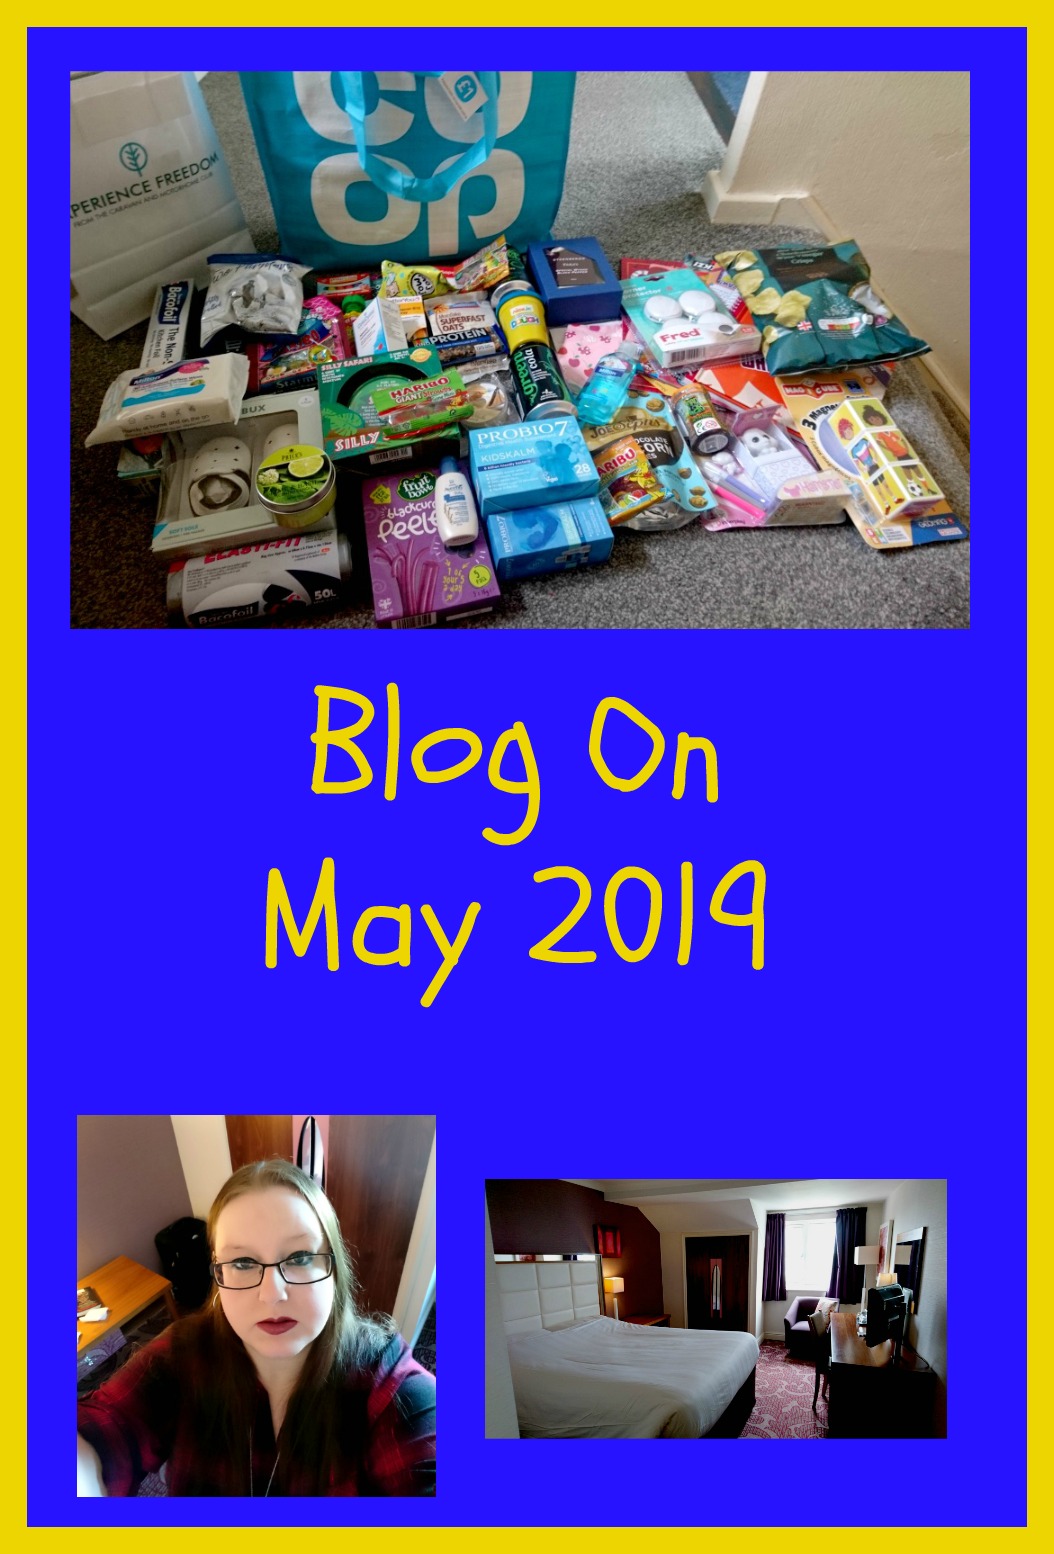 Blog On May 2019 feature image